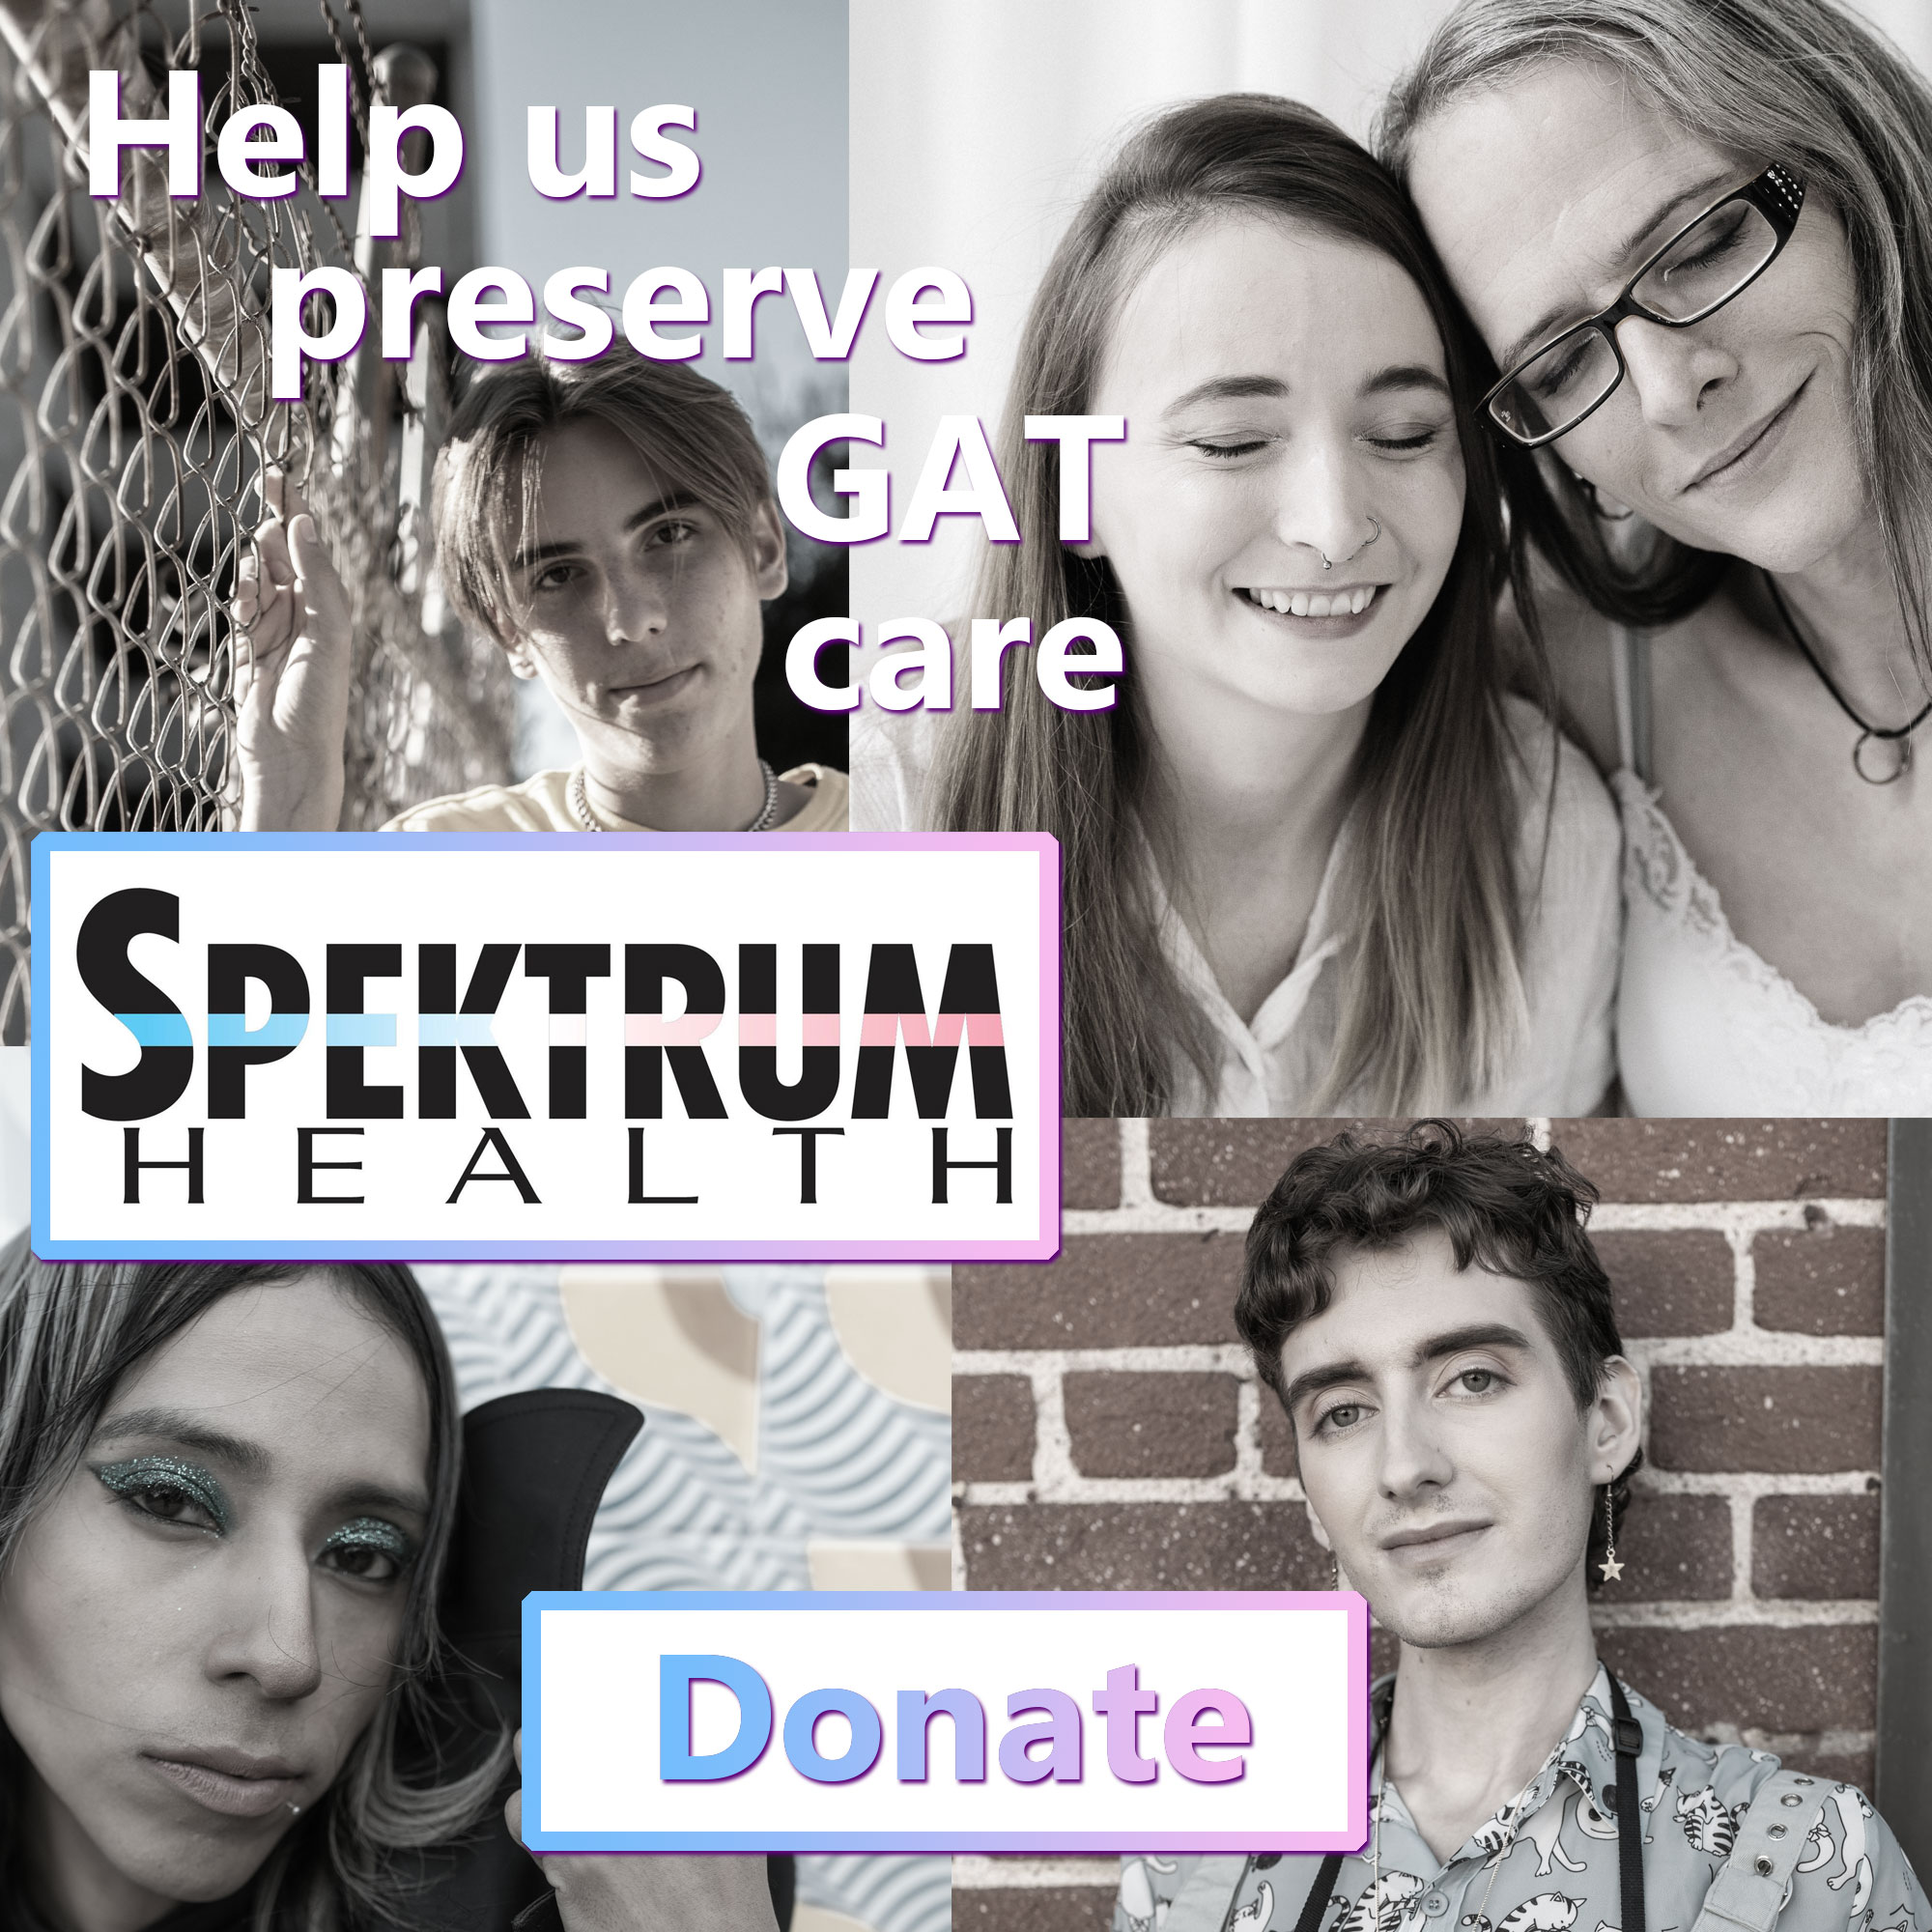 Donate to support GAT care